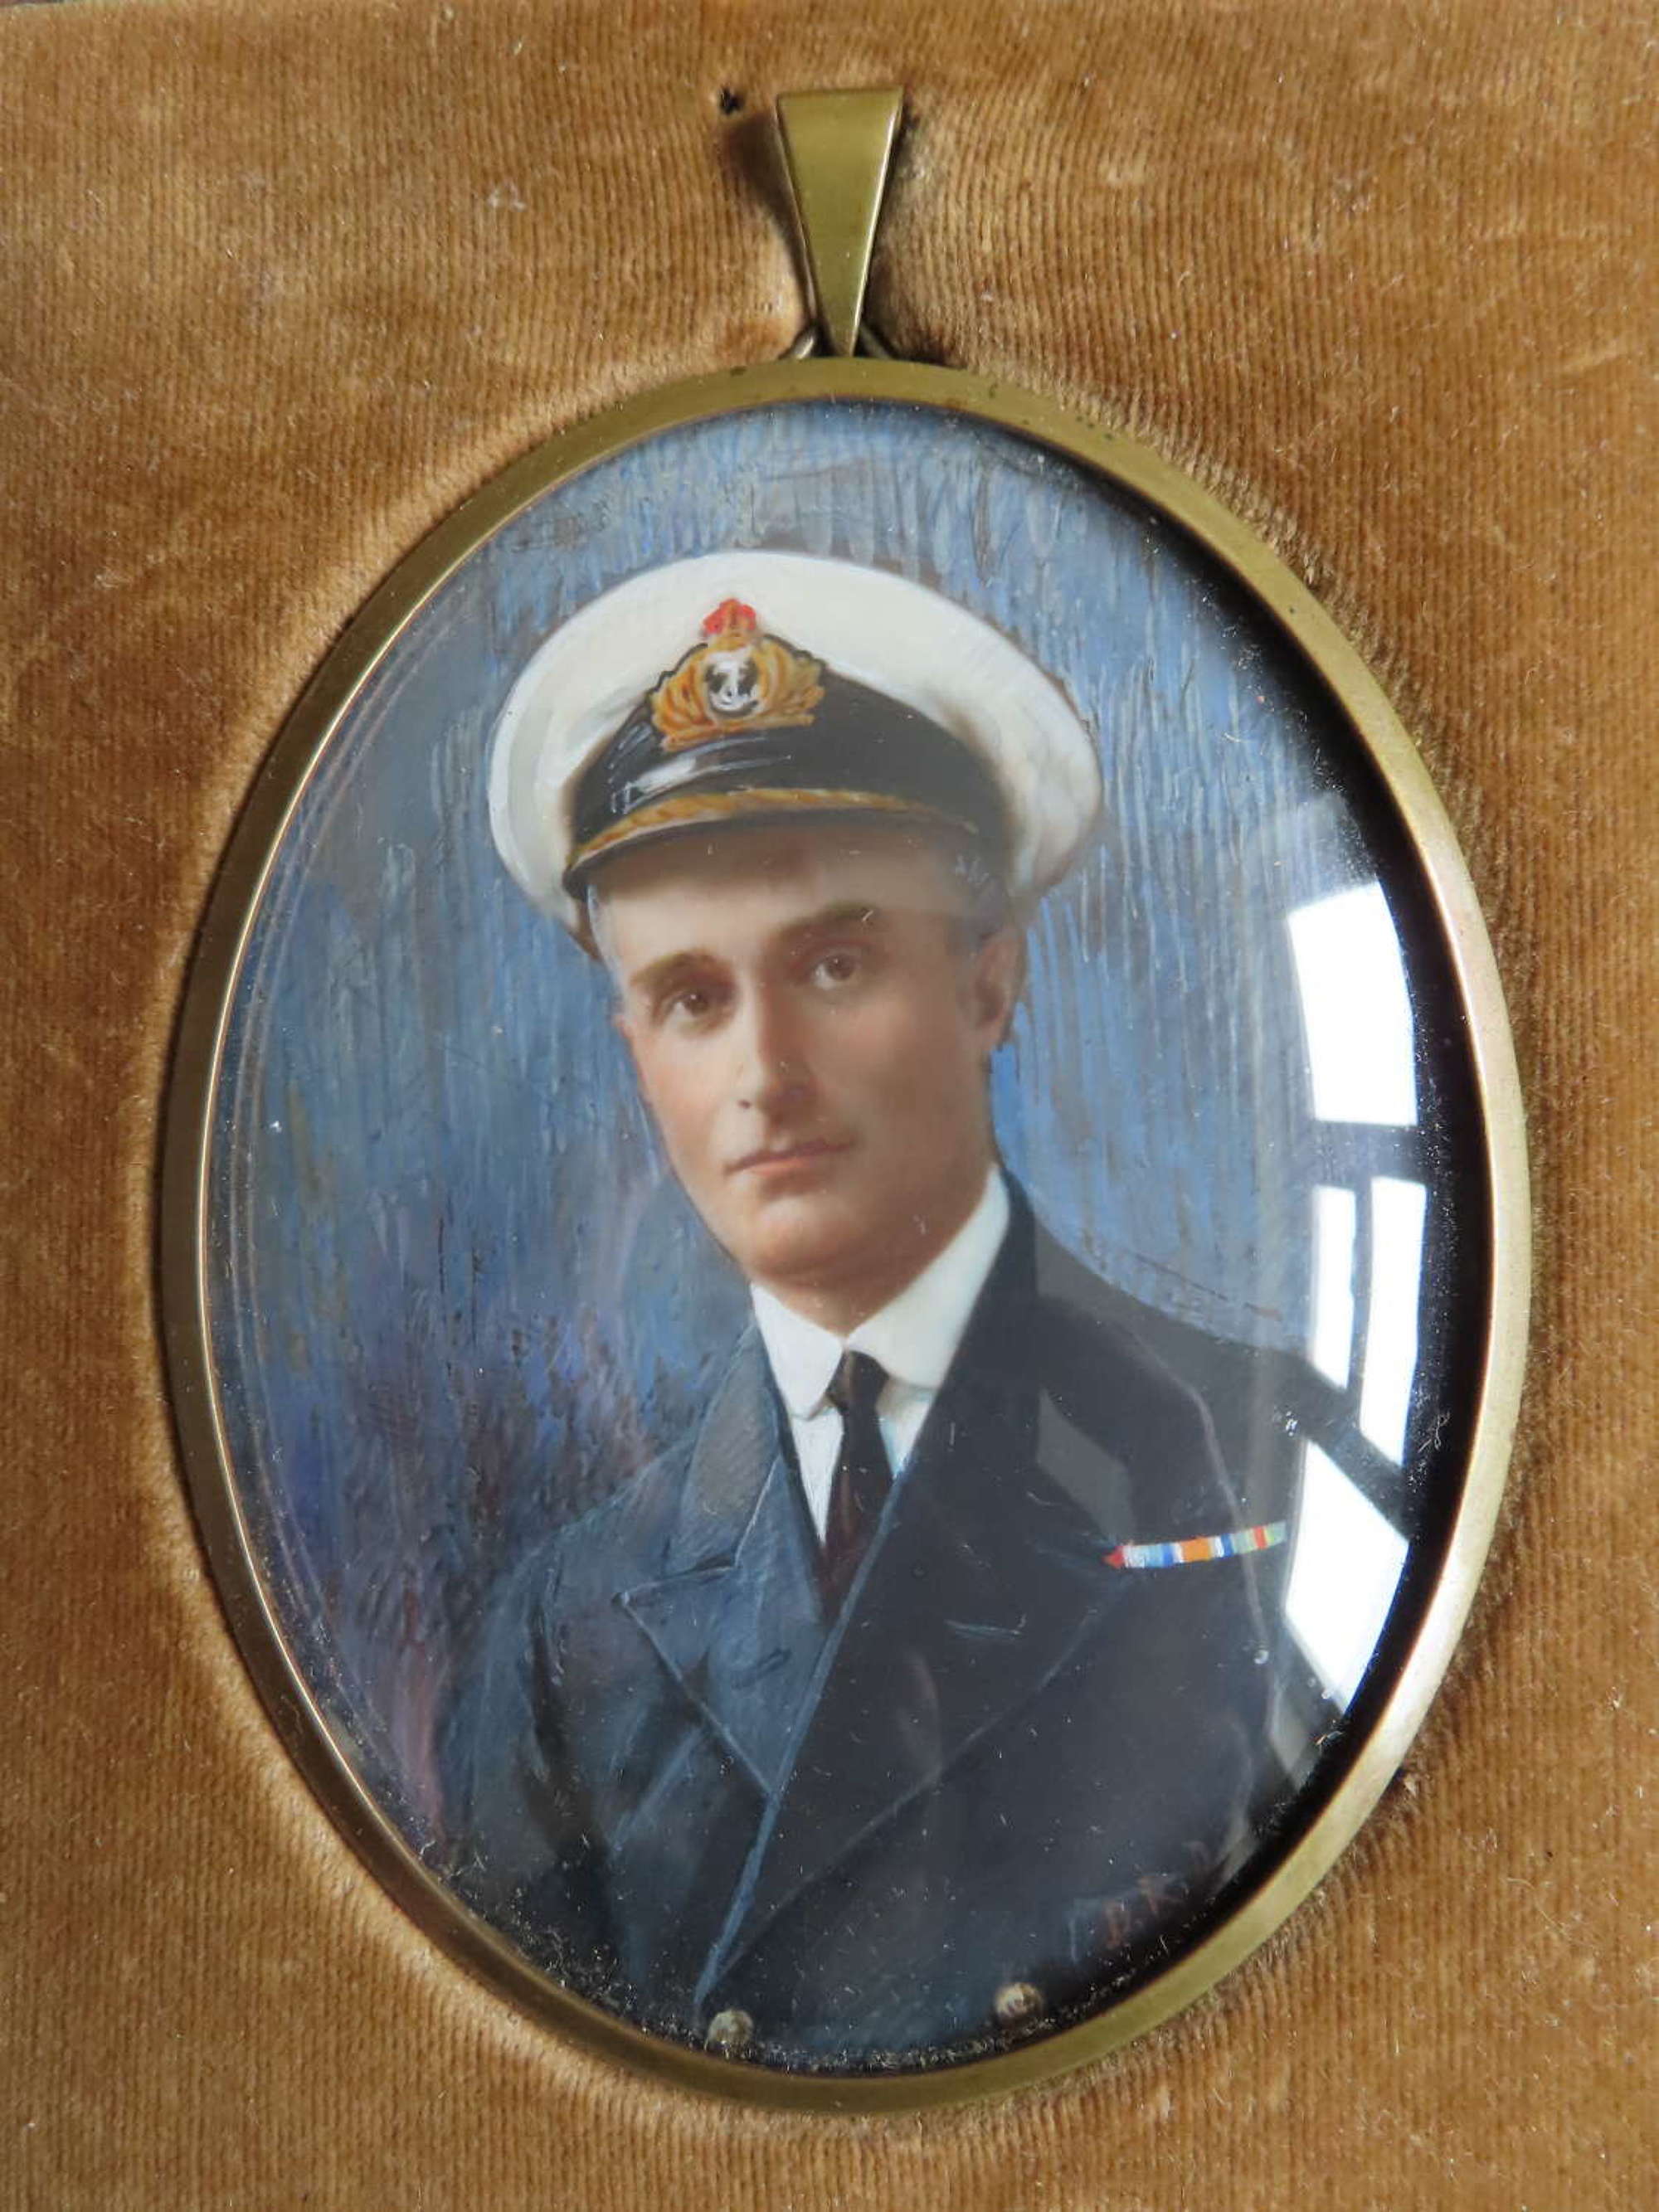 WW1 Royal Navy Officer Cased Portrait Miniature Signed by the Artist